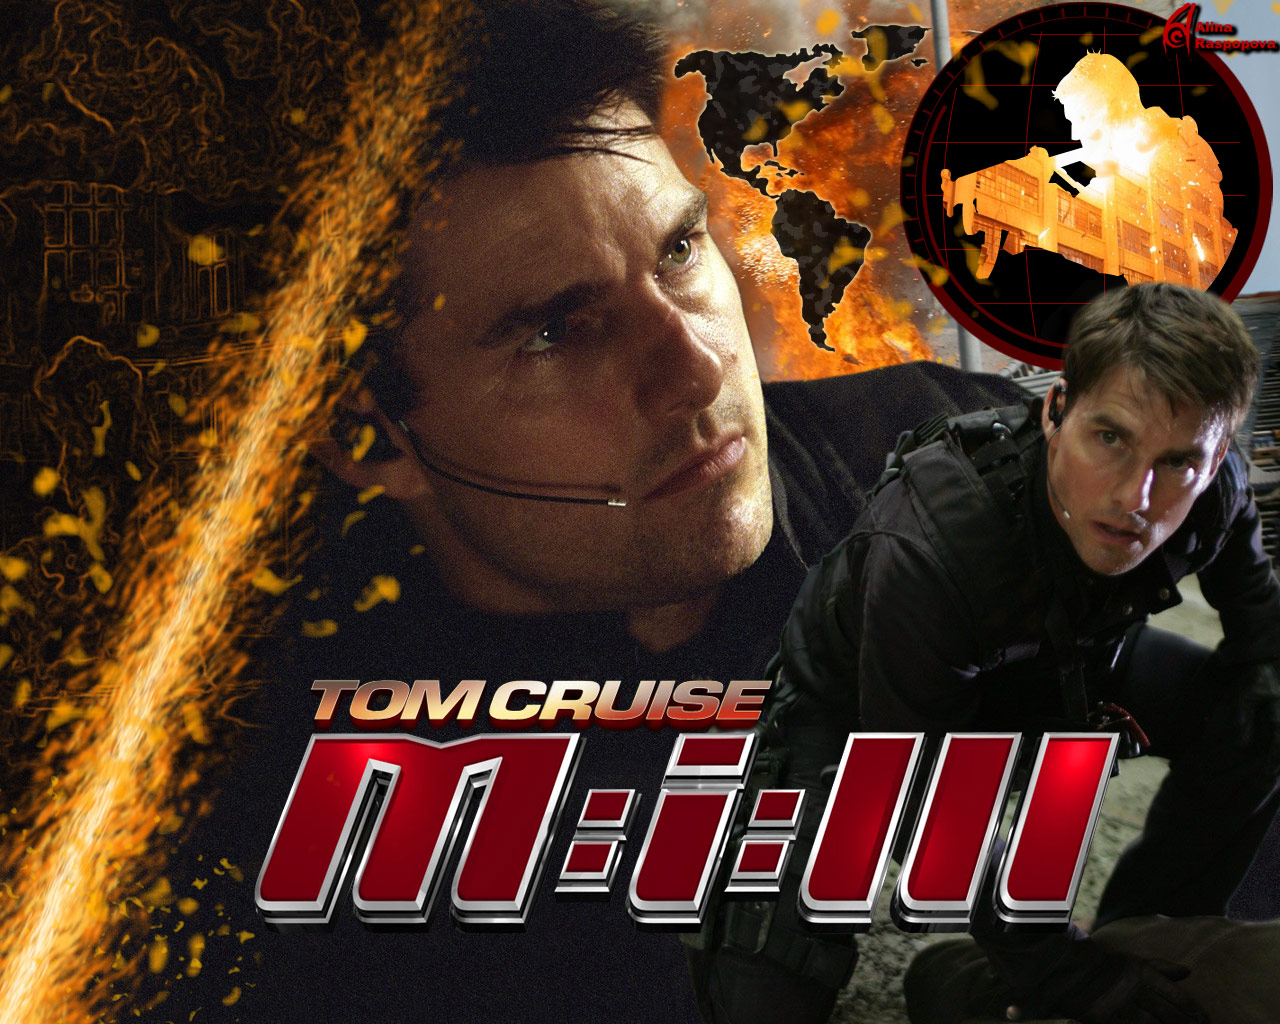 Download full size Mission Impossible wallpaper / Movies / 1280x1024